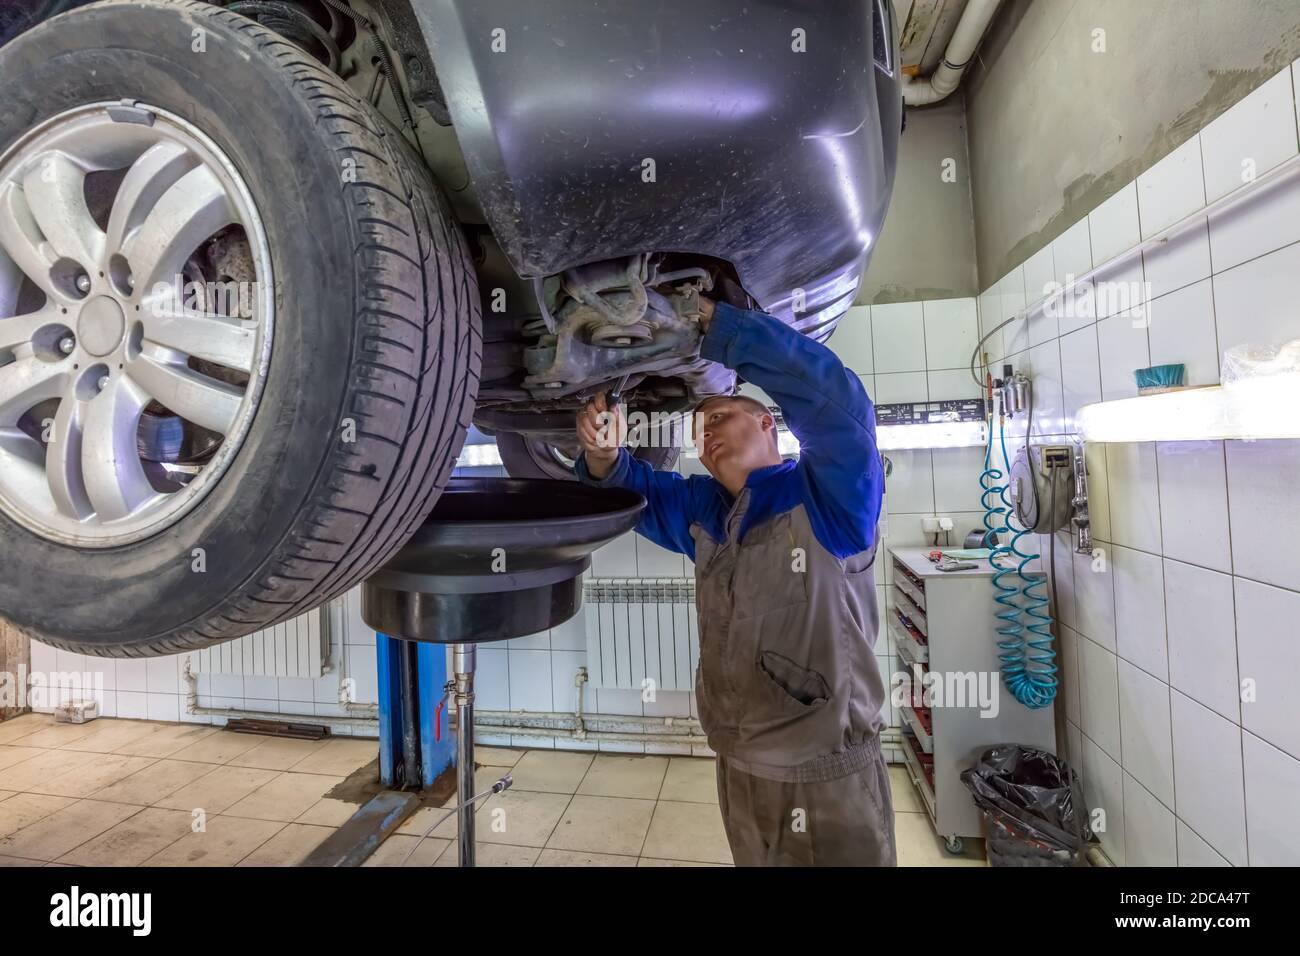 Car mechanic changes oil in a workshop. Mechanic standing under the car and draining oil into a special cannister via funnel. Stock Photo